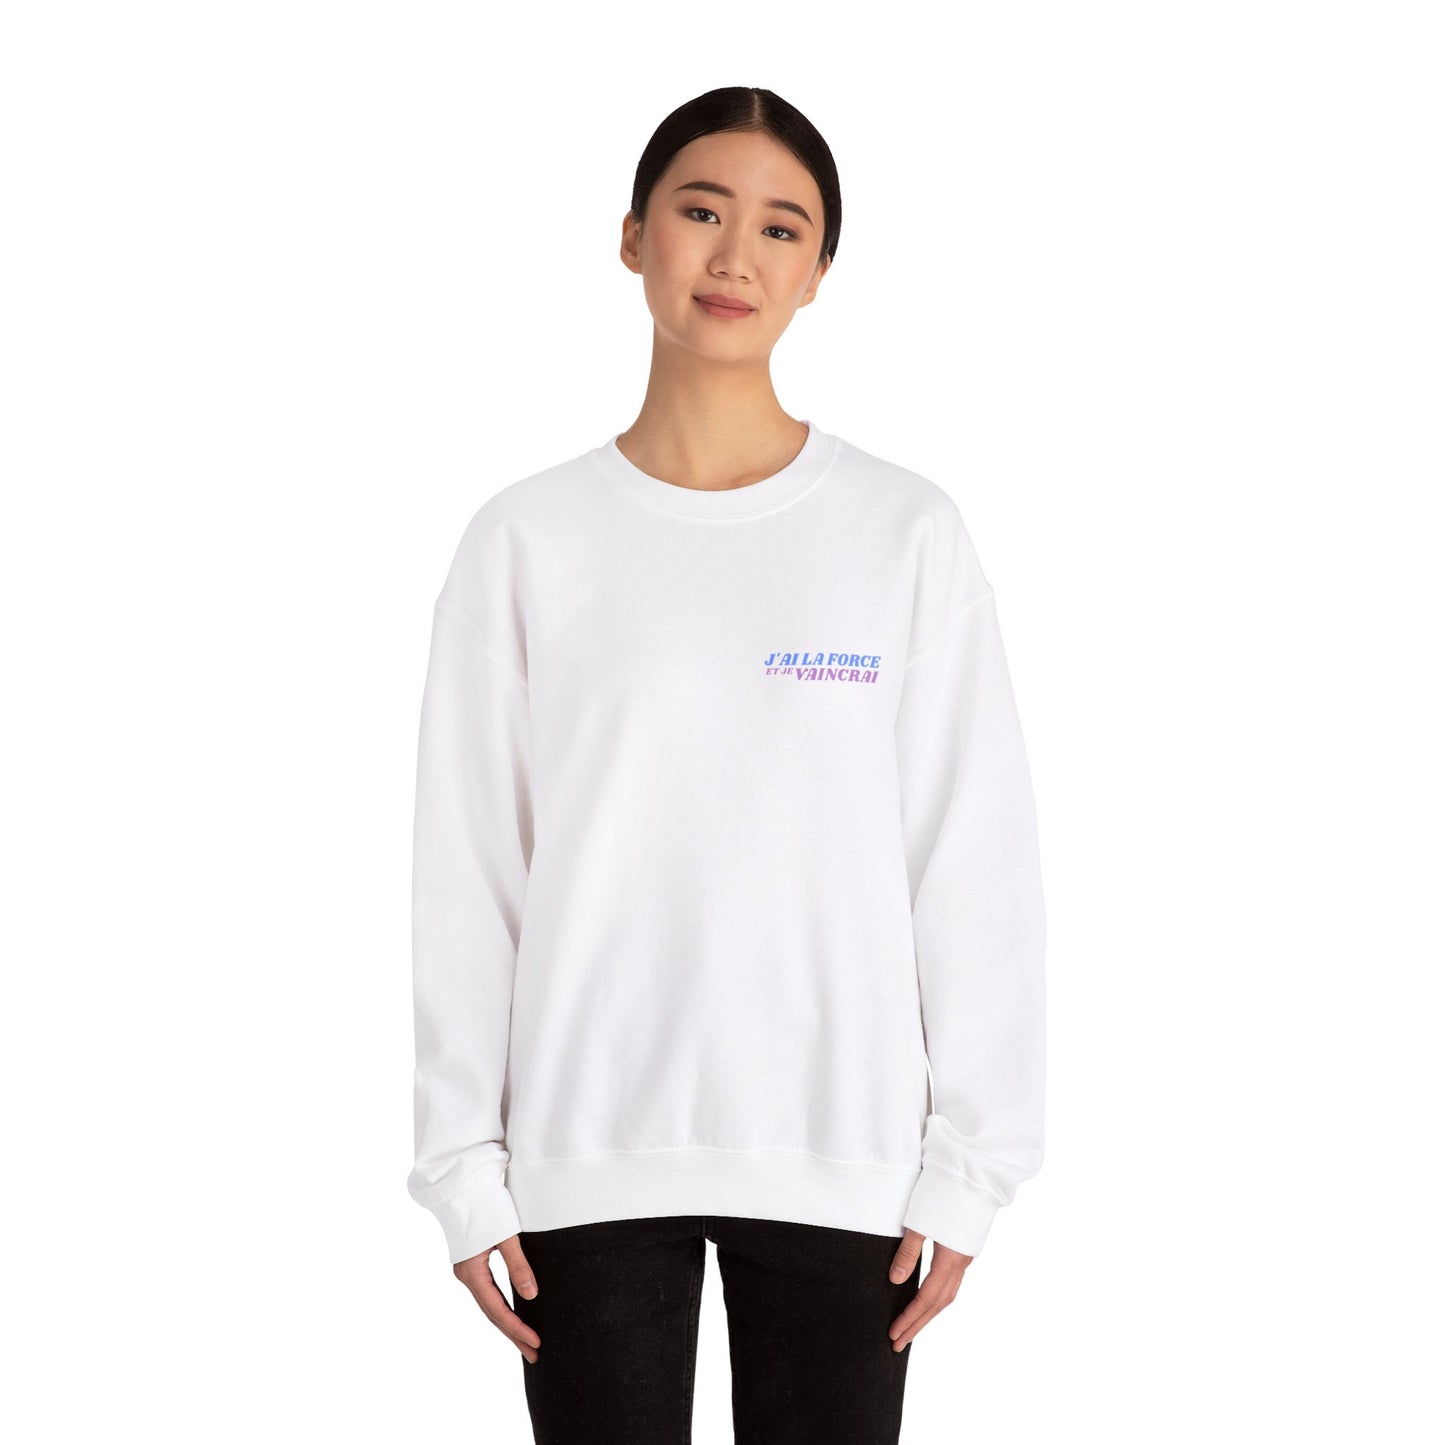 Printed crewneck sweatshirt -I HAVE THE STRENGTH- for adults